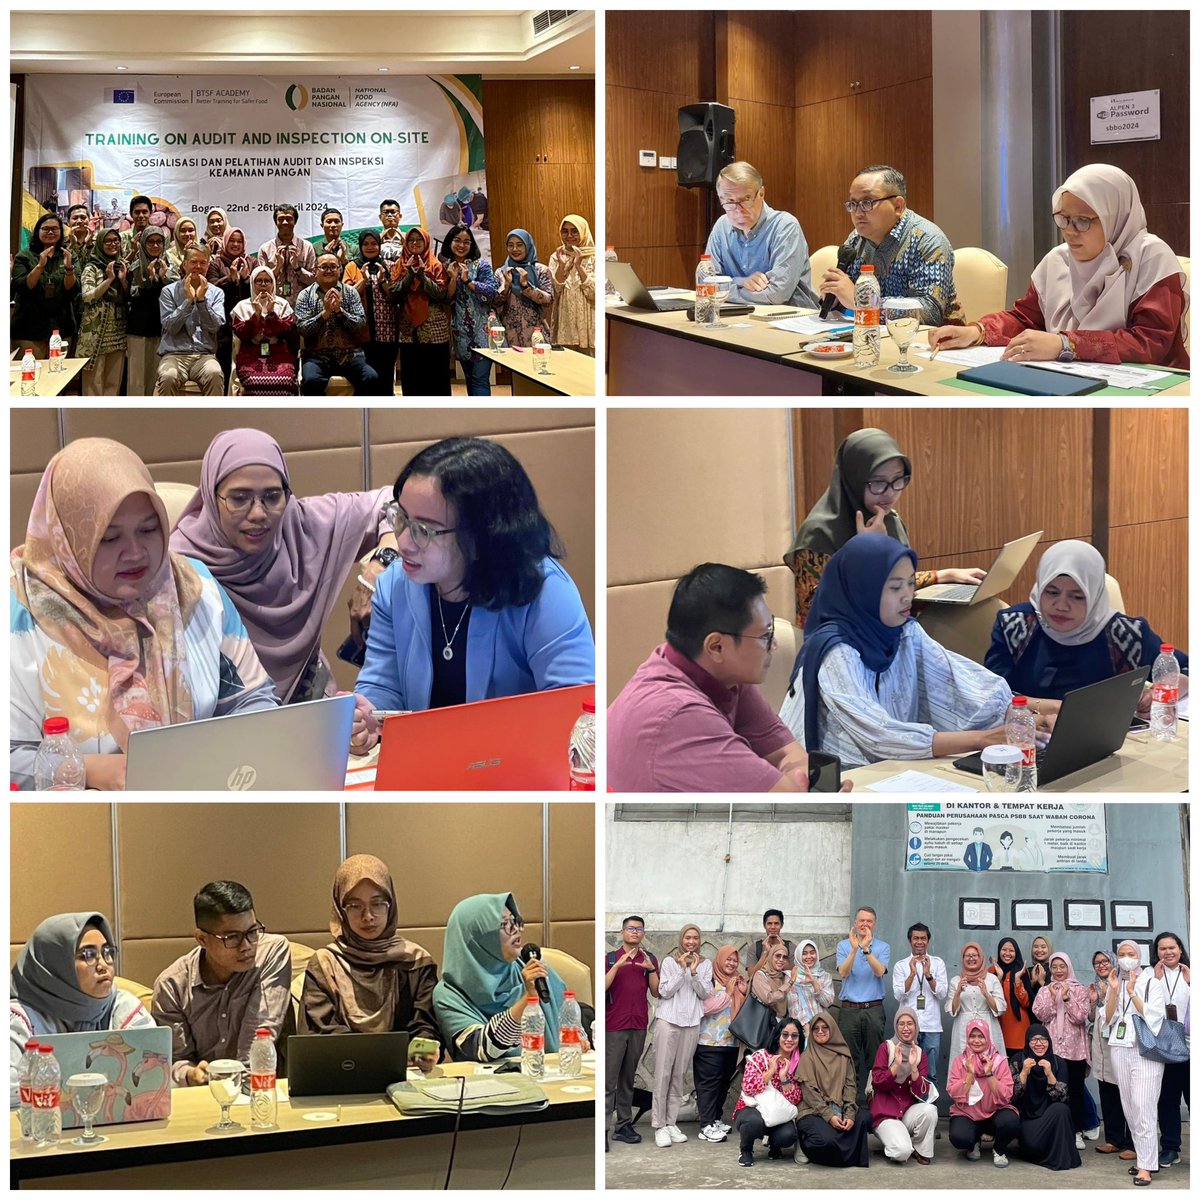 EU senior expert in food safety Michael Flüh provided training on 22-26 April in Bogor to Indonesian food safety and laboratory experts to improve capacity in sampling of nutmeg & testing of mycotoxins. 🇪🇺🤝🇮🇩 Working together for better health & food safety 👍